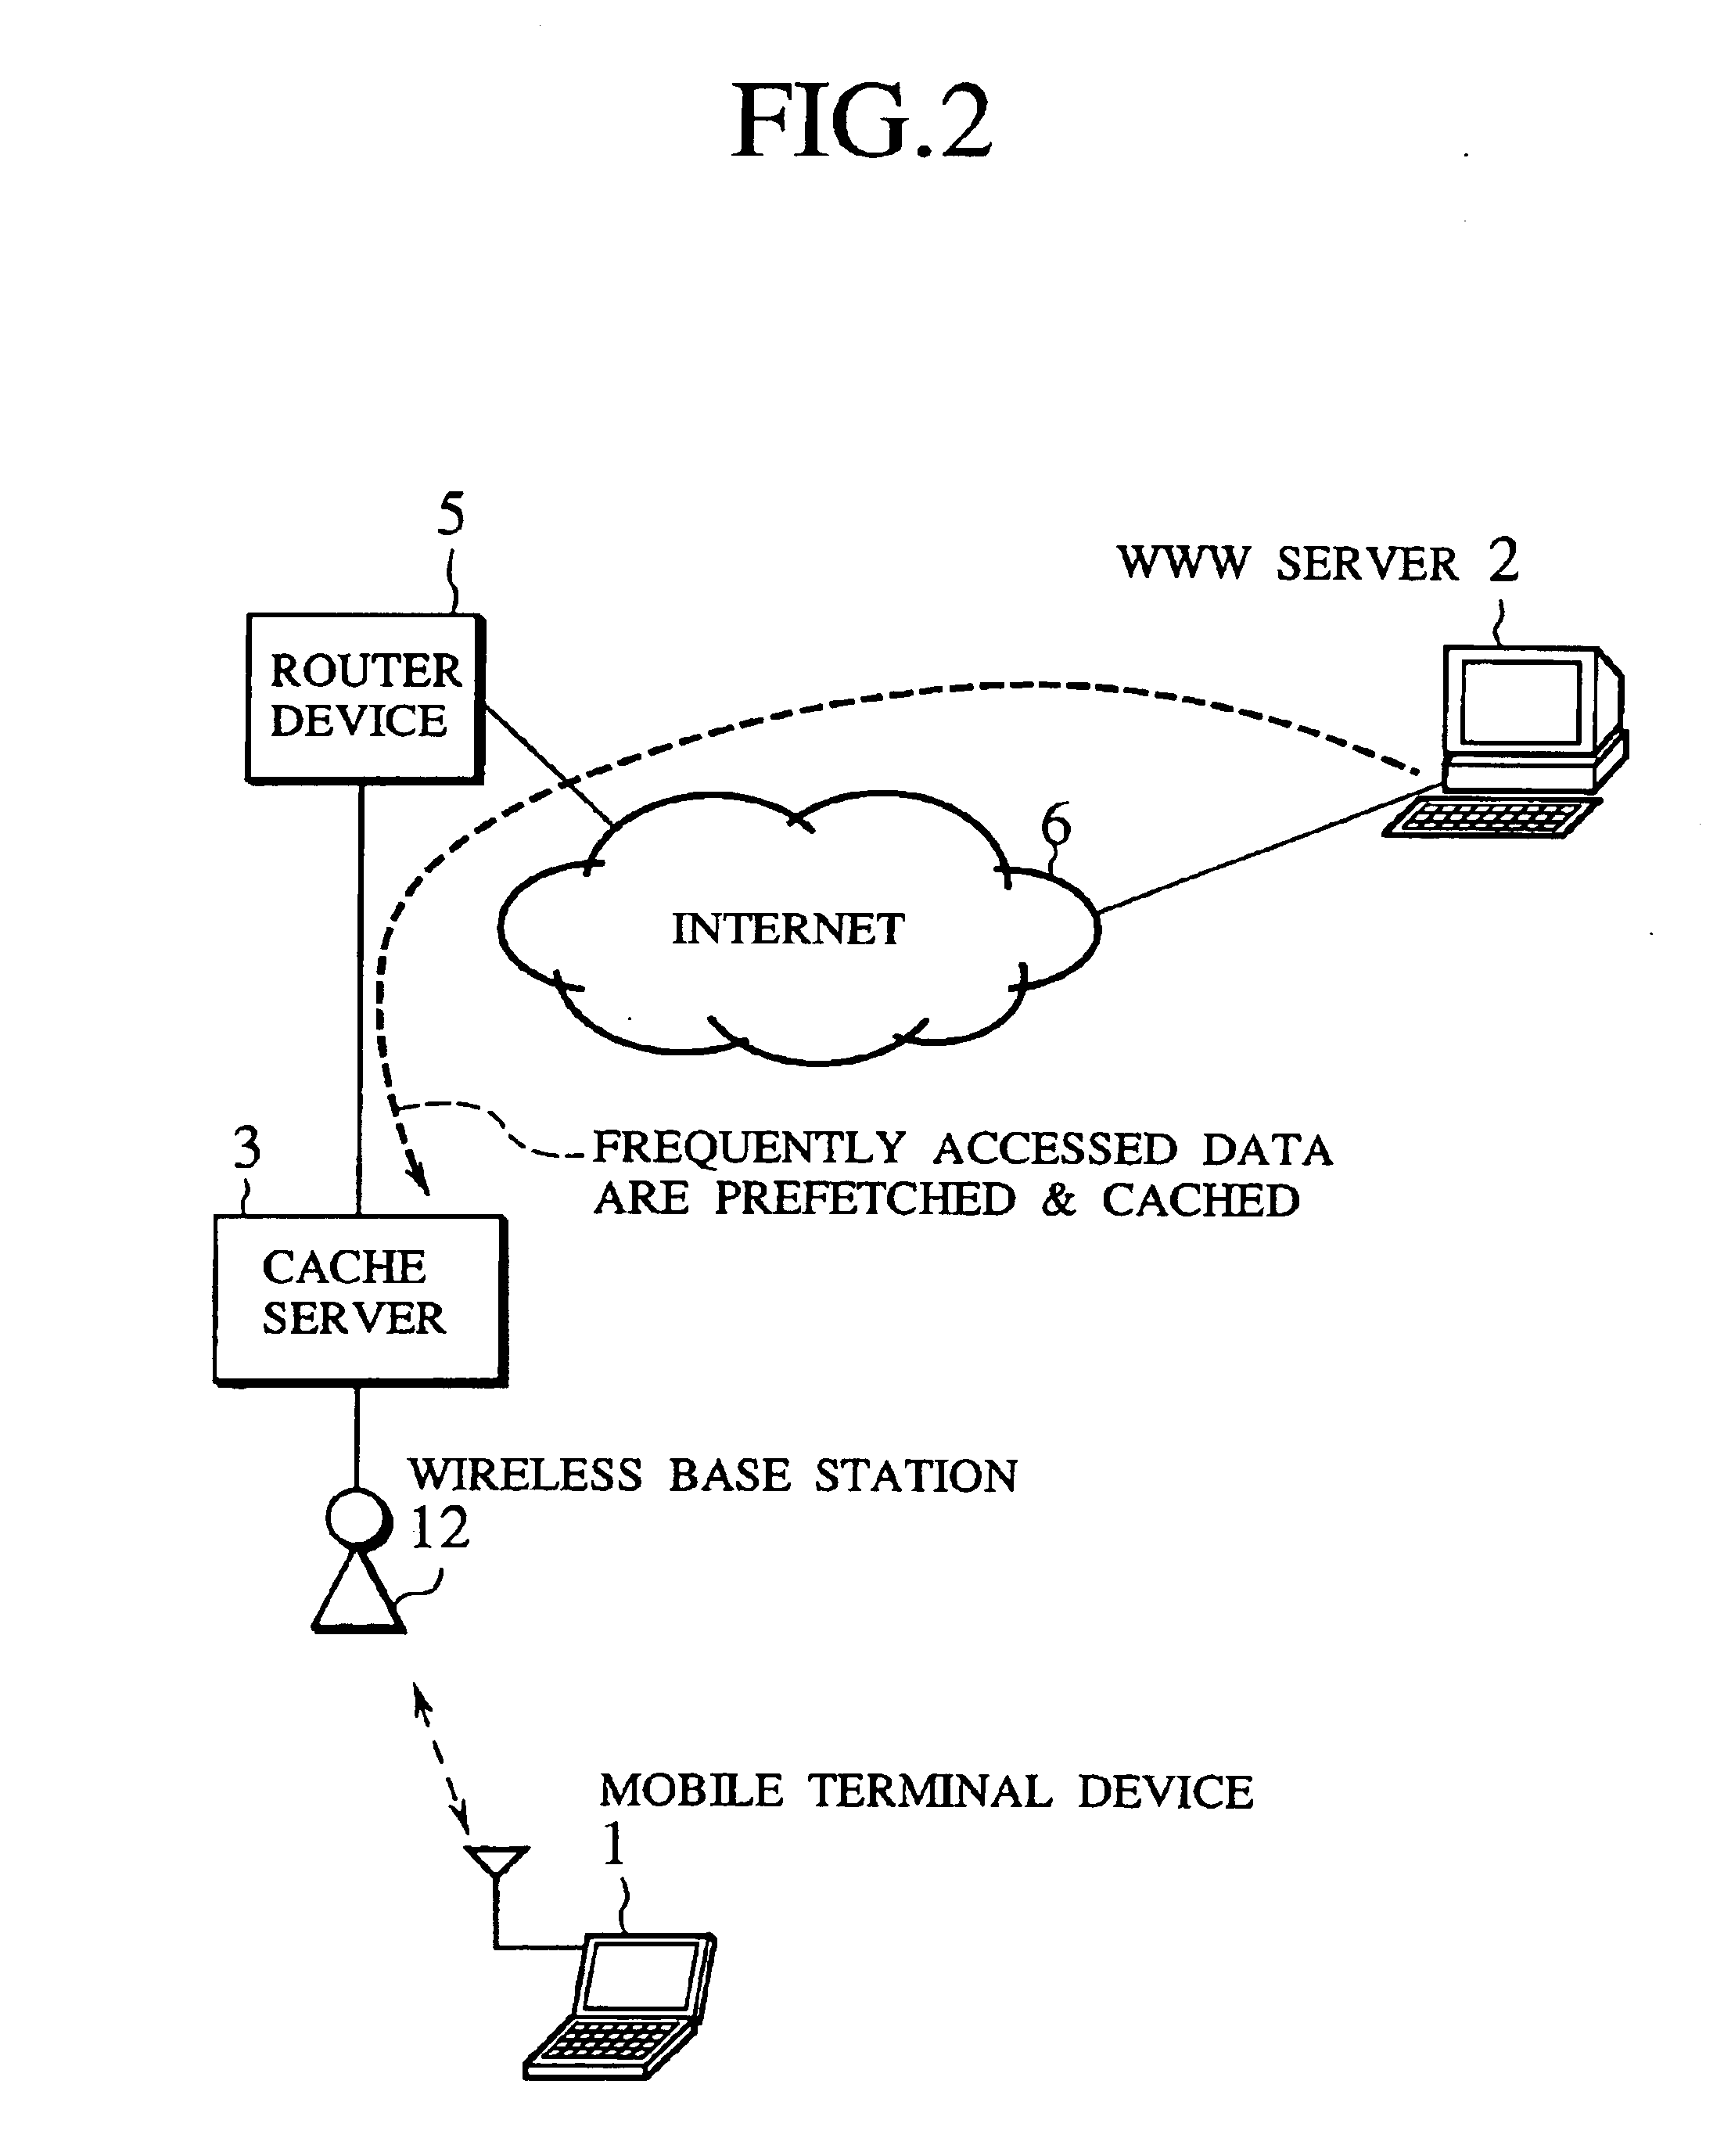 Scheme for information delivery to mobile computers using cache servers